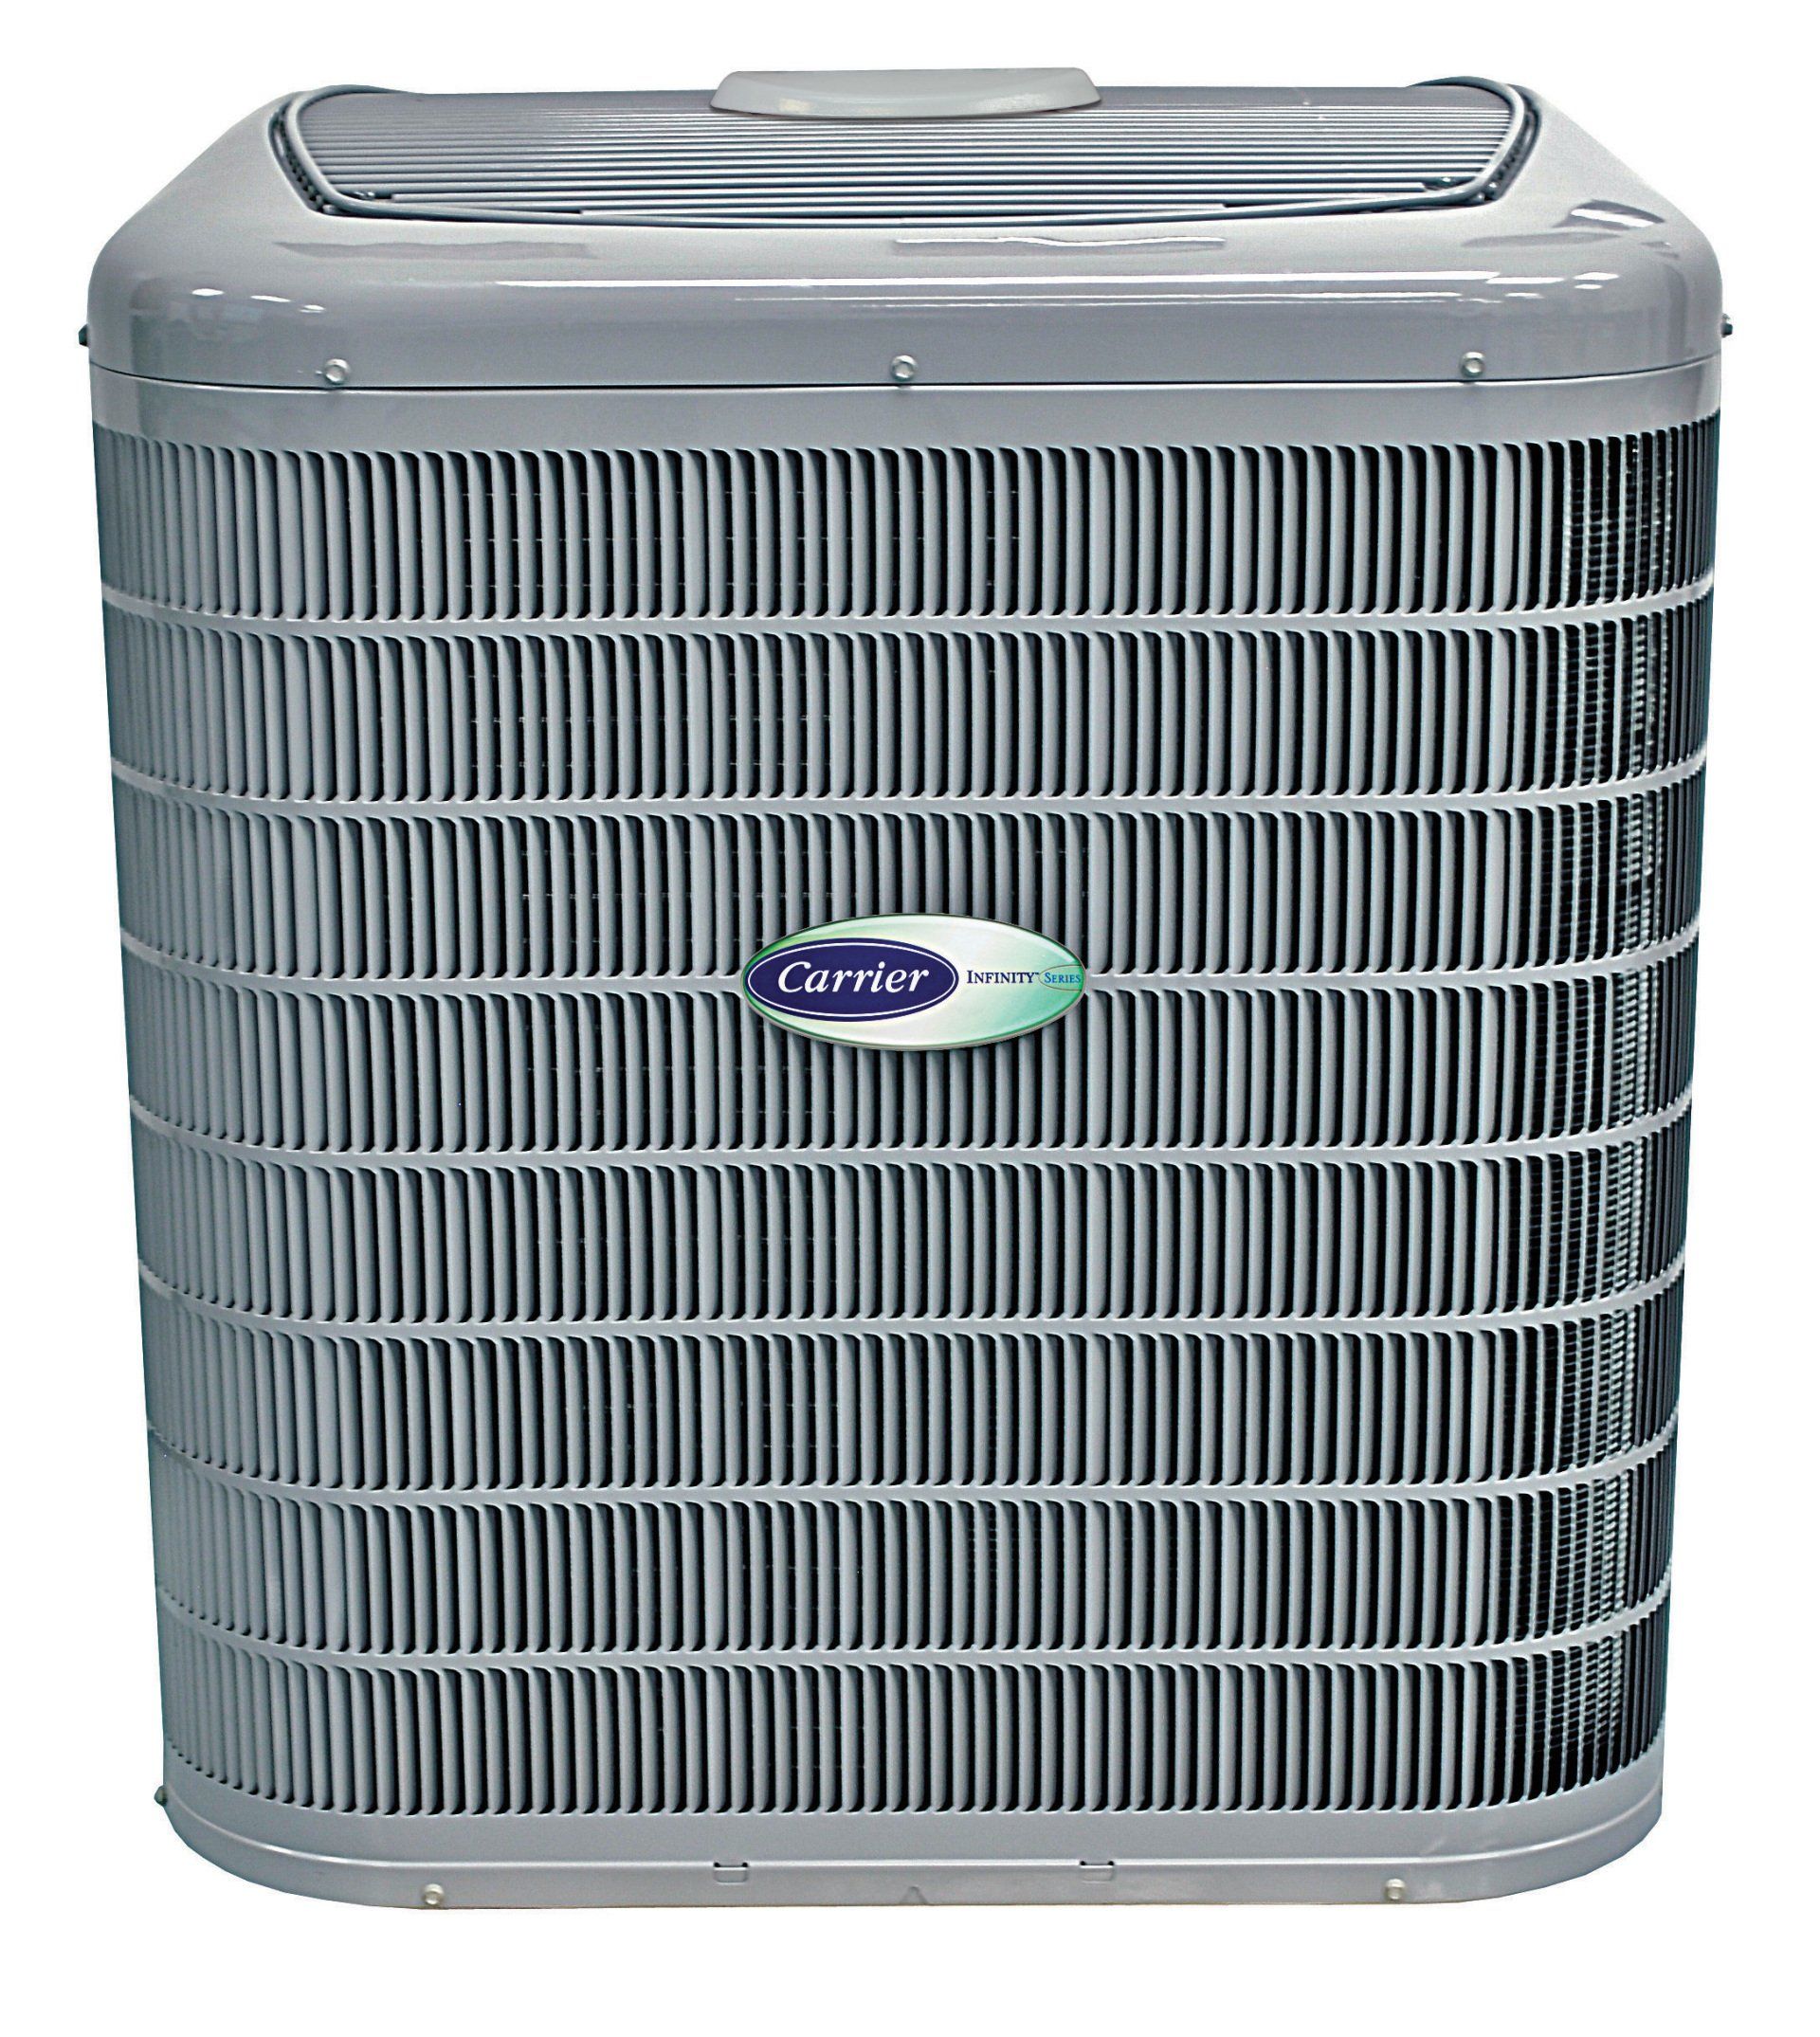 Carrier Infinity Air Conditioner — Hartselle, AL — G & L Heating & Cooling, LLC